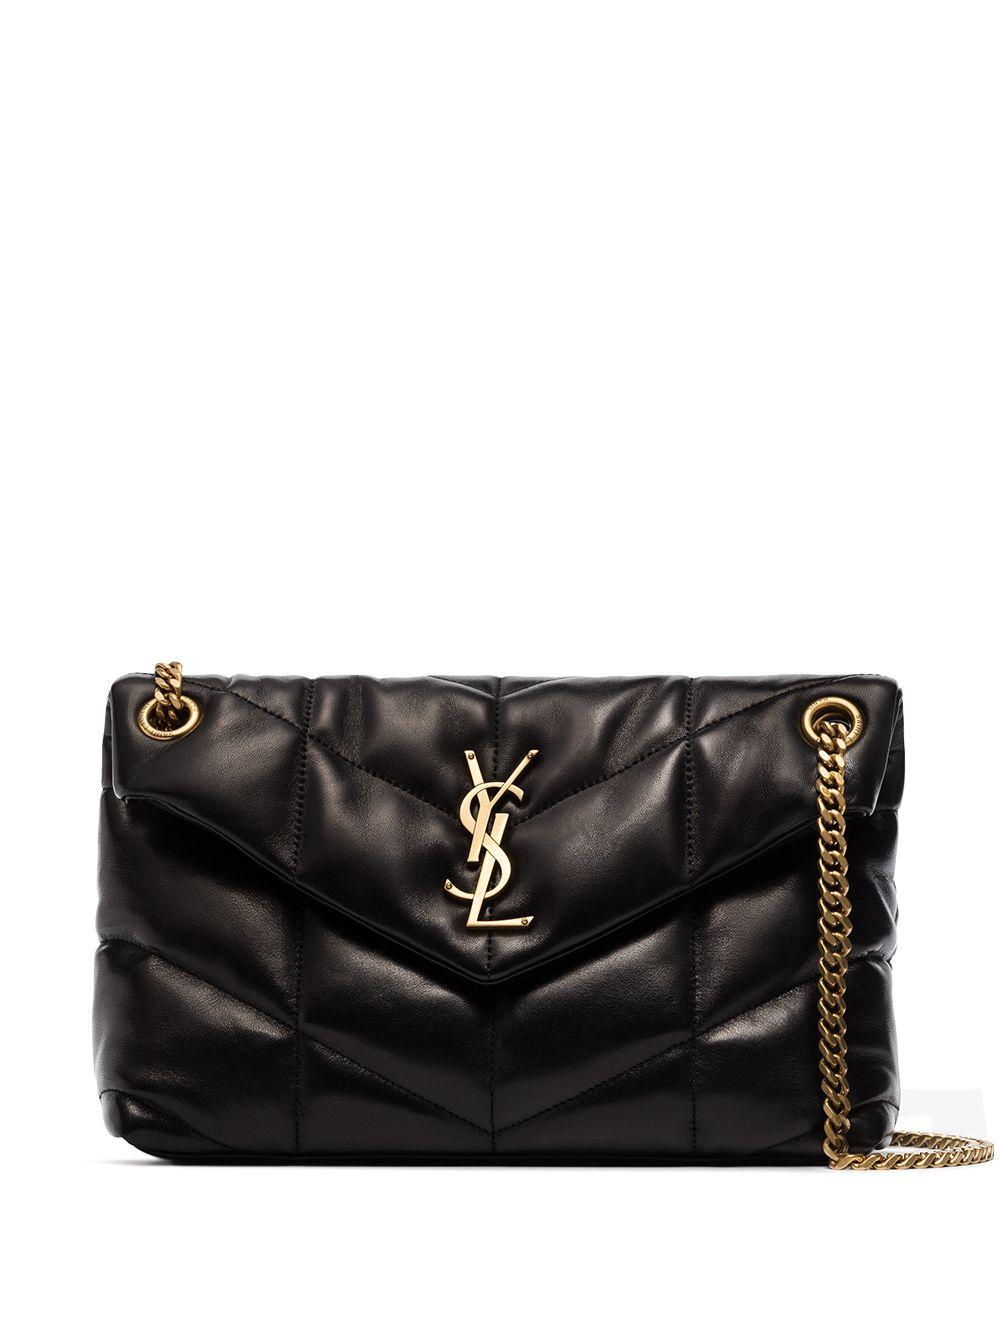 Saint Laurent Loulou Toy Puffer Leather Shoulder Bag in Black | Lyst